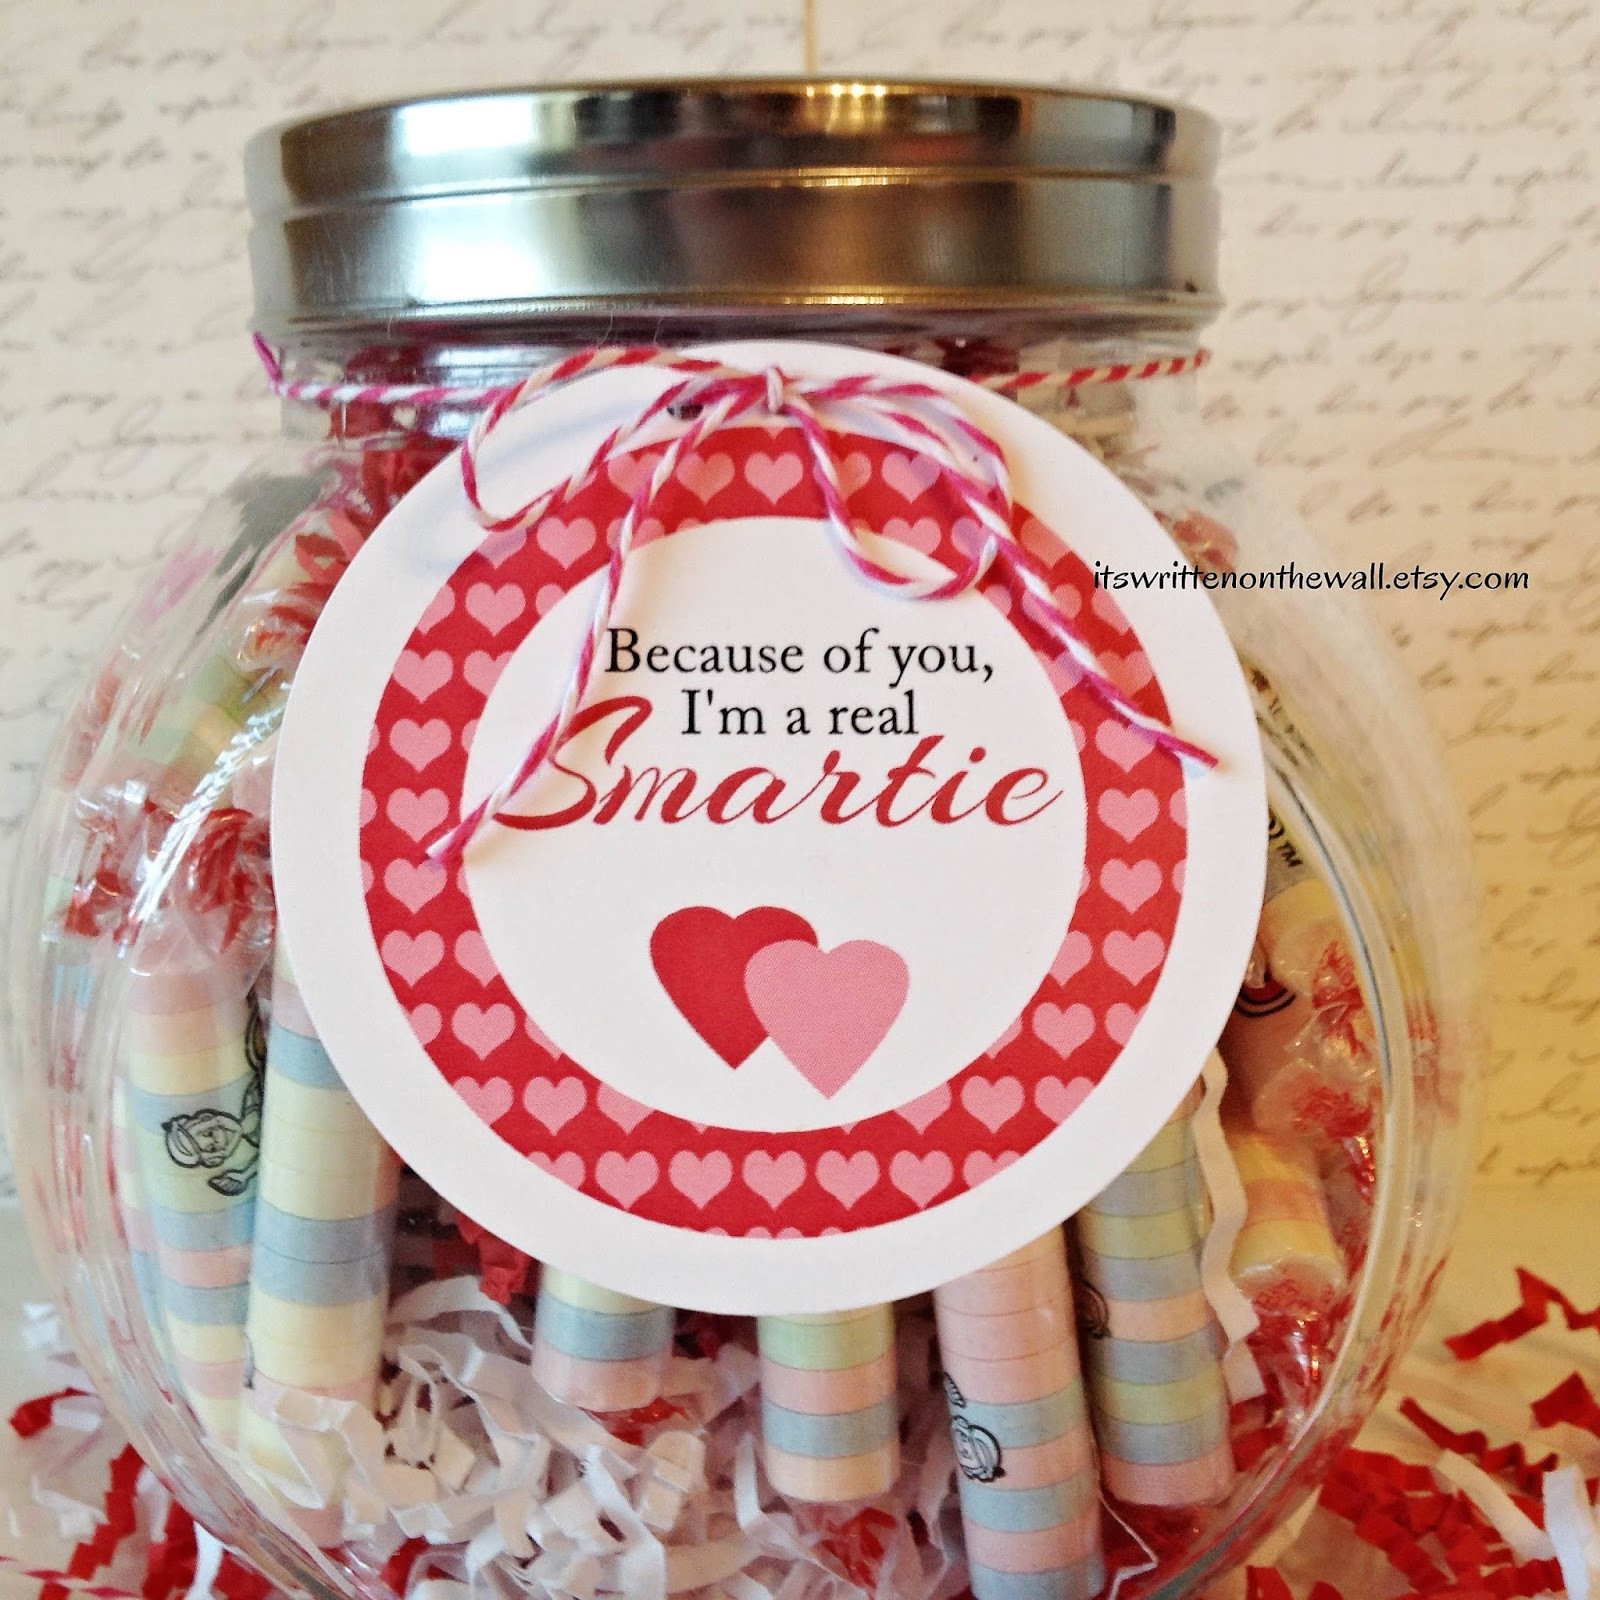 Valentines Teacher Gift Ideas
 It s Written on the Wall "Because of you I m a Smartie